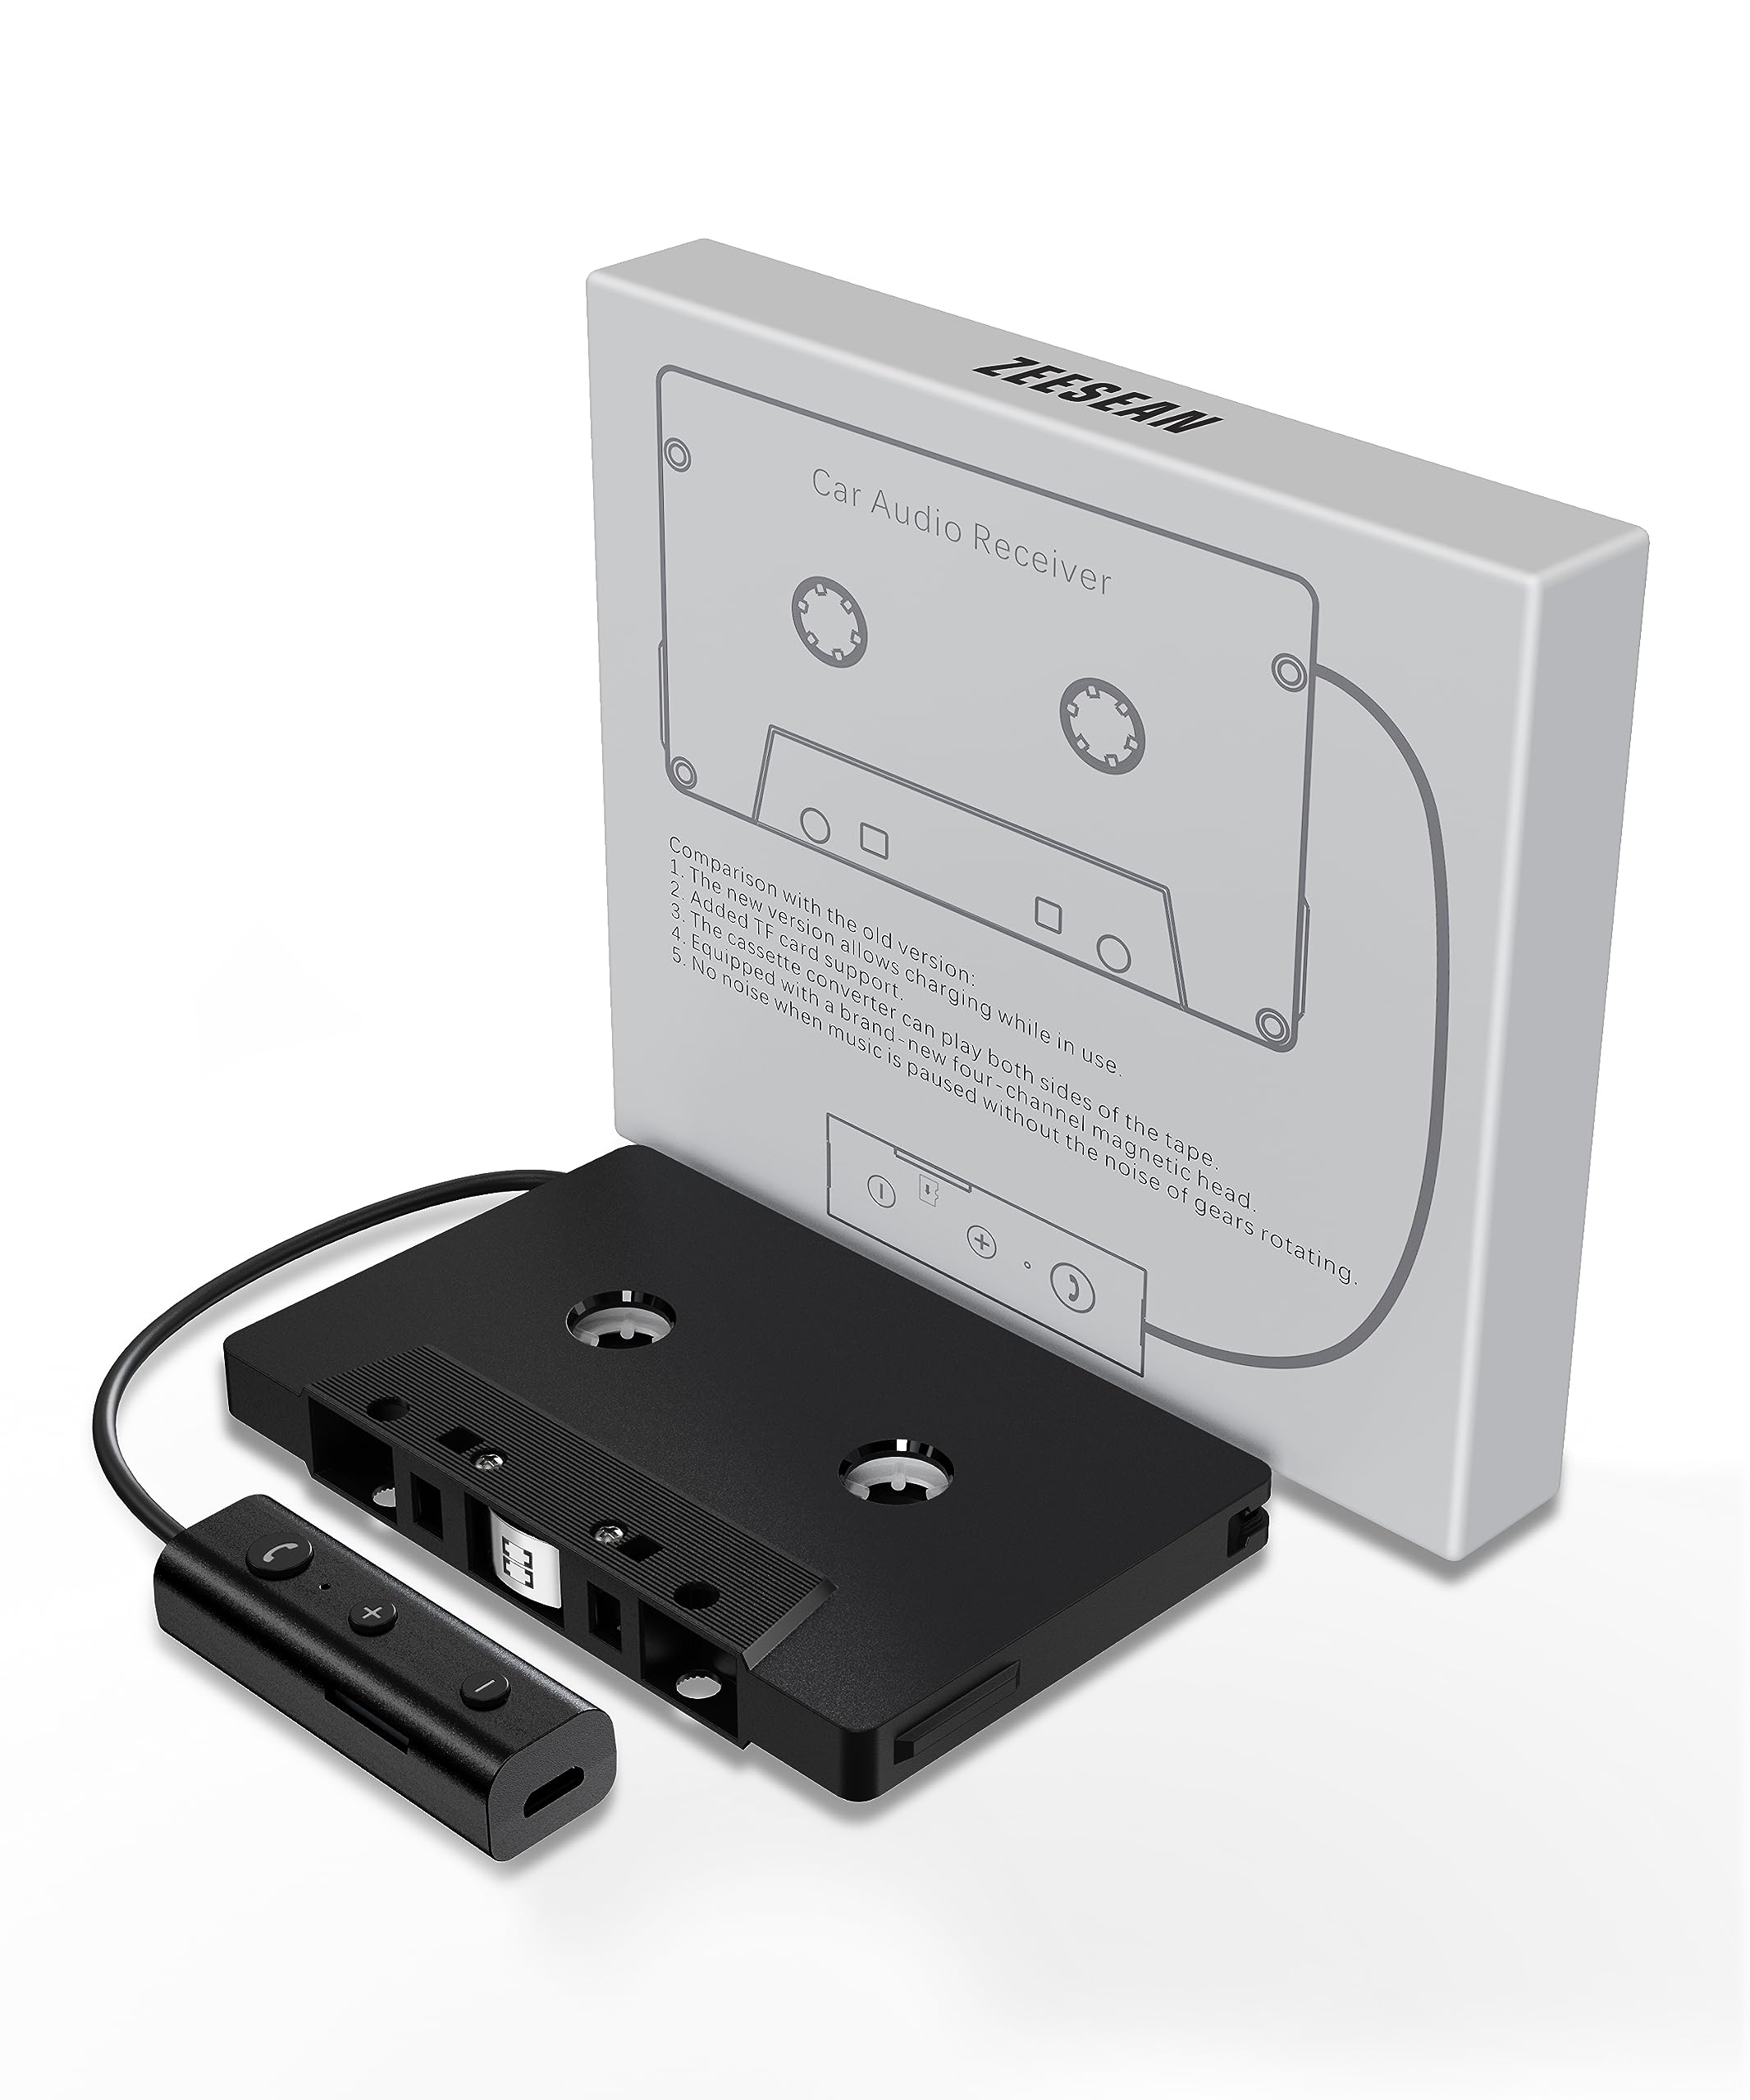 Car Audio Bluetooth Wireless Cassette Receiver, Bluetooth 5.0 Car Audio Stereo Cassette Vehicle Tape Converter Cassette Work While Charging Support TF Card